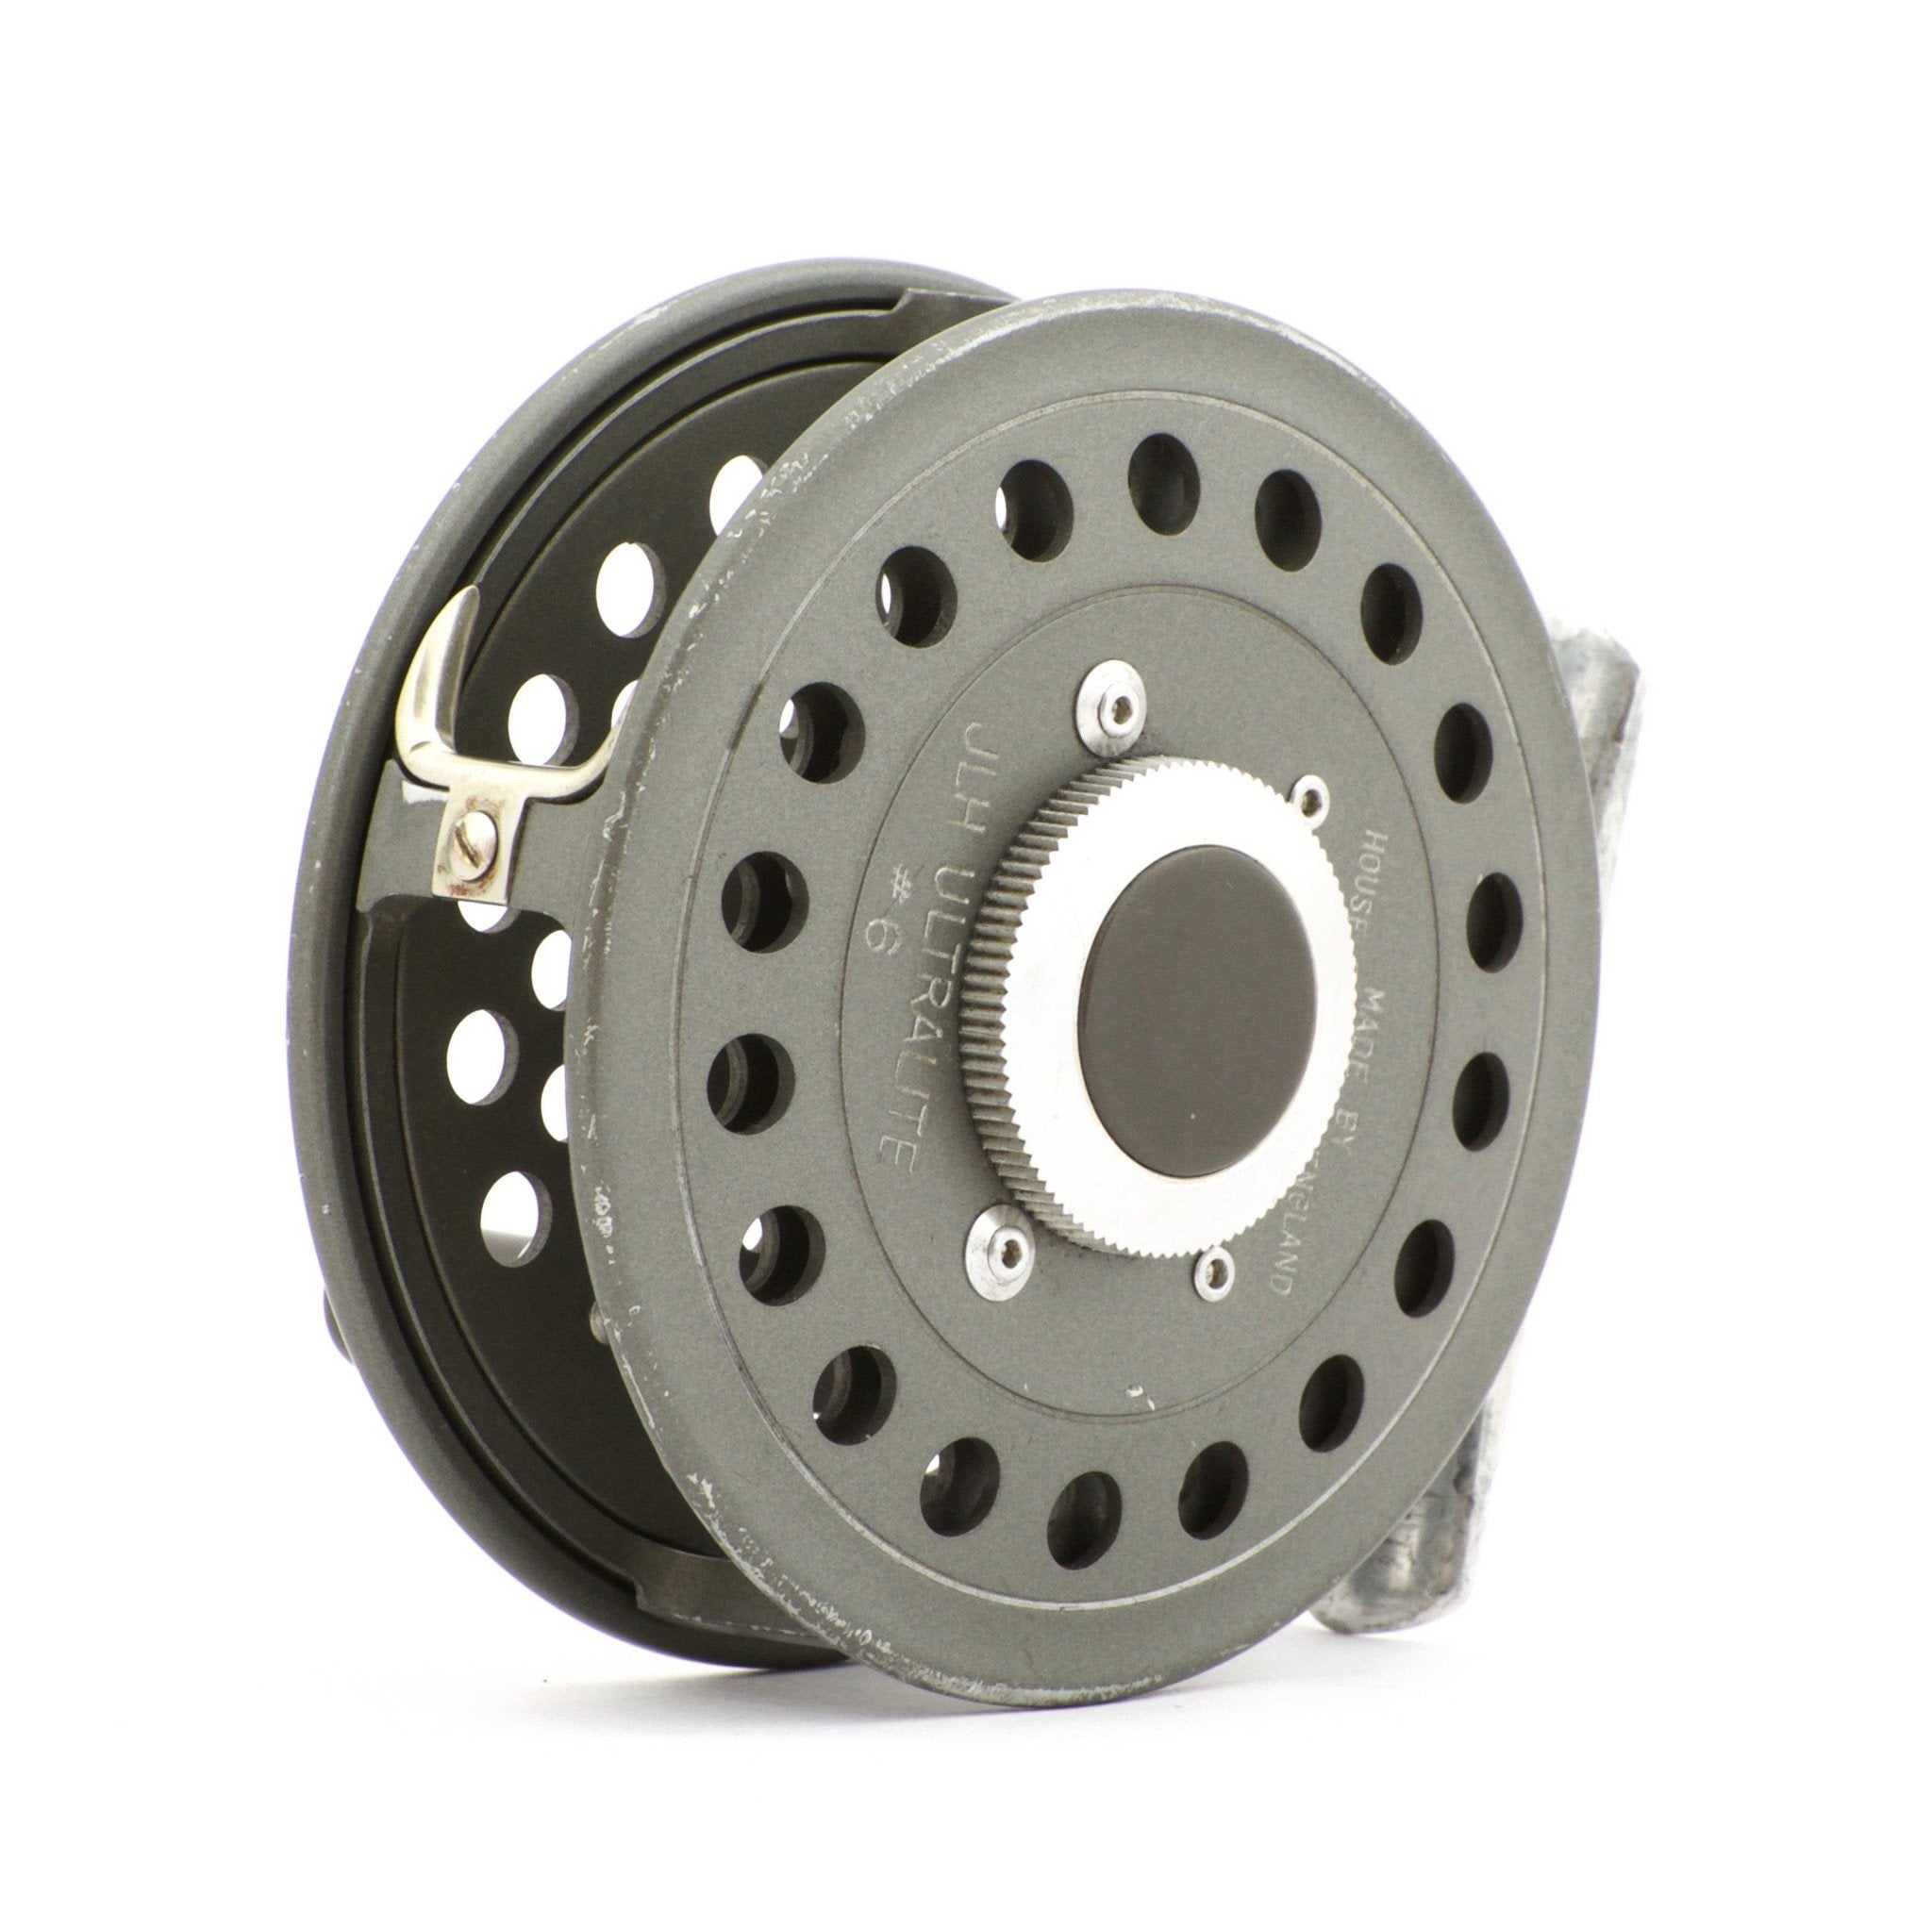 House of Hardy Fly Reel Ultralite Disc #6 HEU015 5 to 6wt fly line Fly  fishing